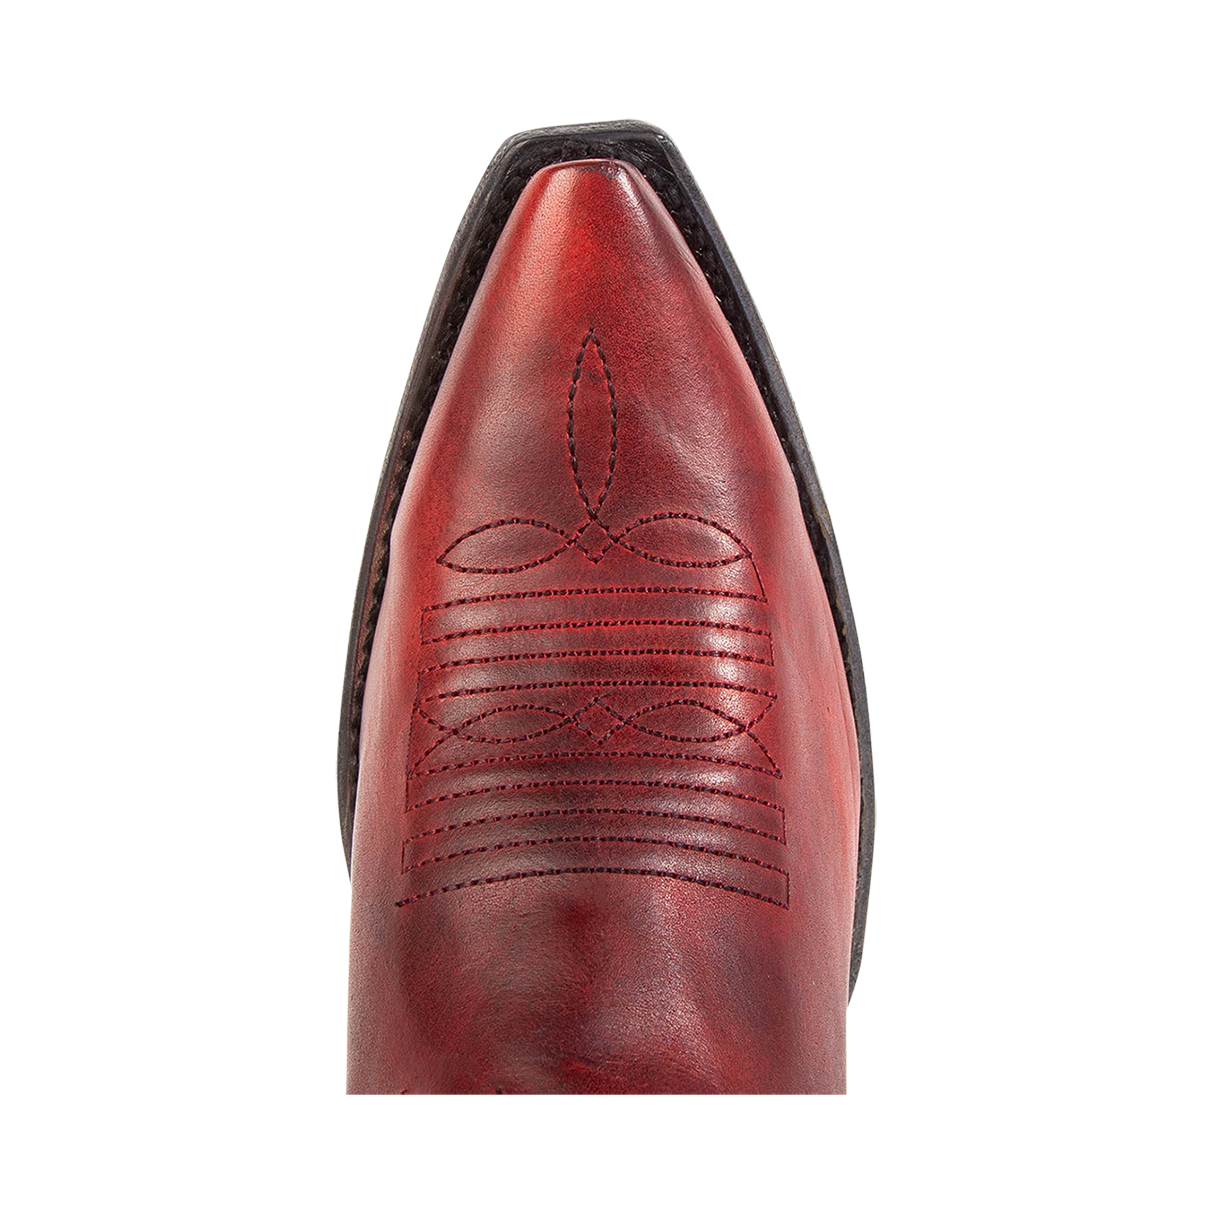 Top view showing snip toe construction with stitch detailing on FREEBIRD women's Woodland red leather boot